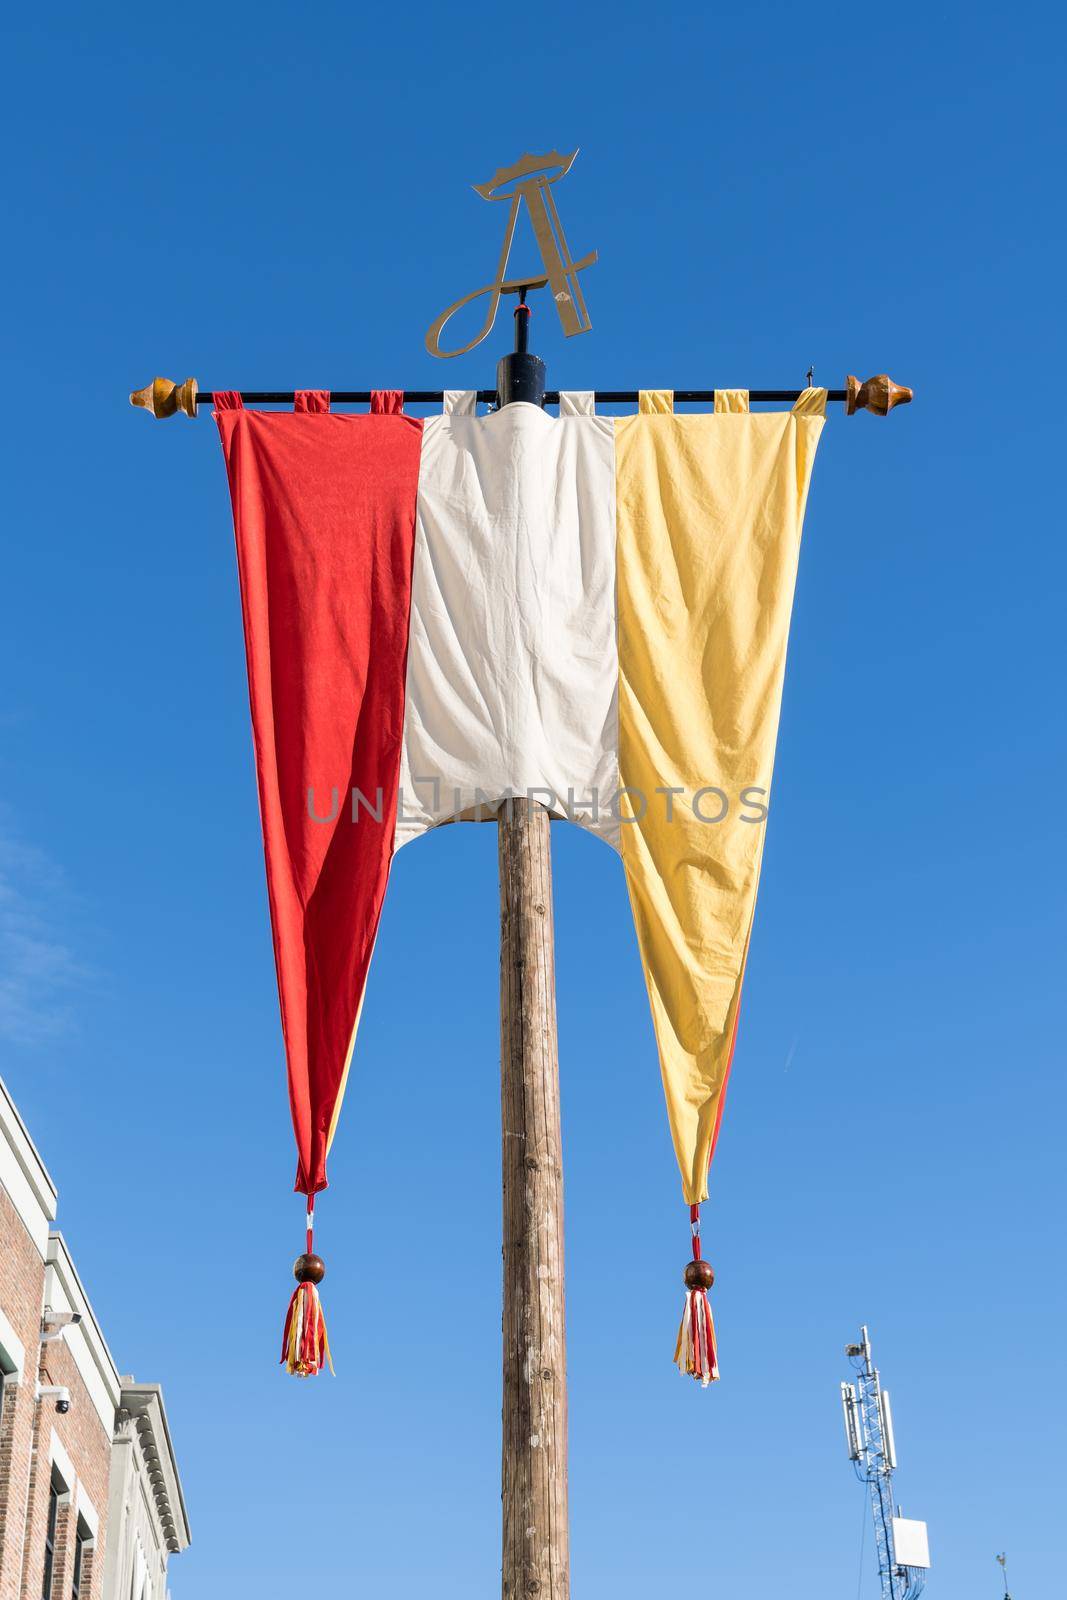 Dutch Flag, in red, white and yellow, of traditional festival named Carnaval, like Mardi Gras, in 's-Hertogenbosch, Oeteldonk with a blue sky